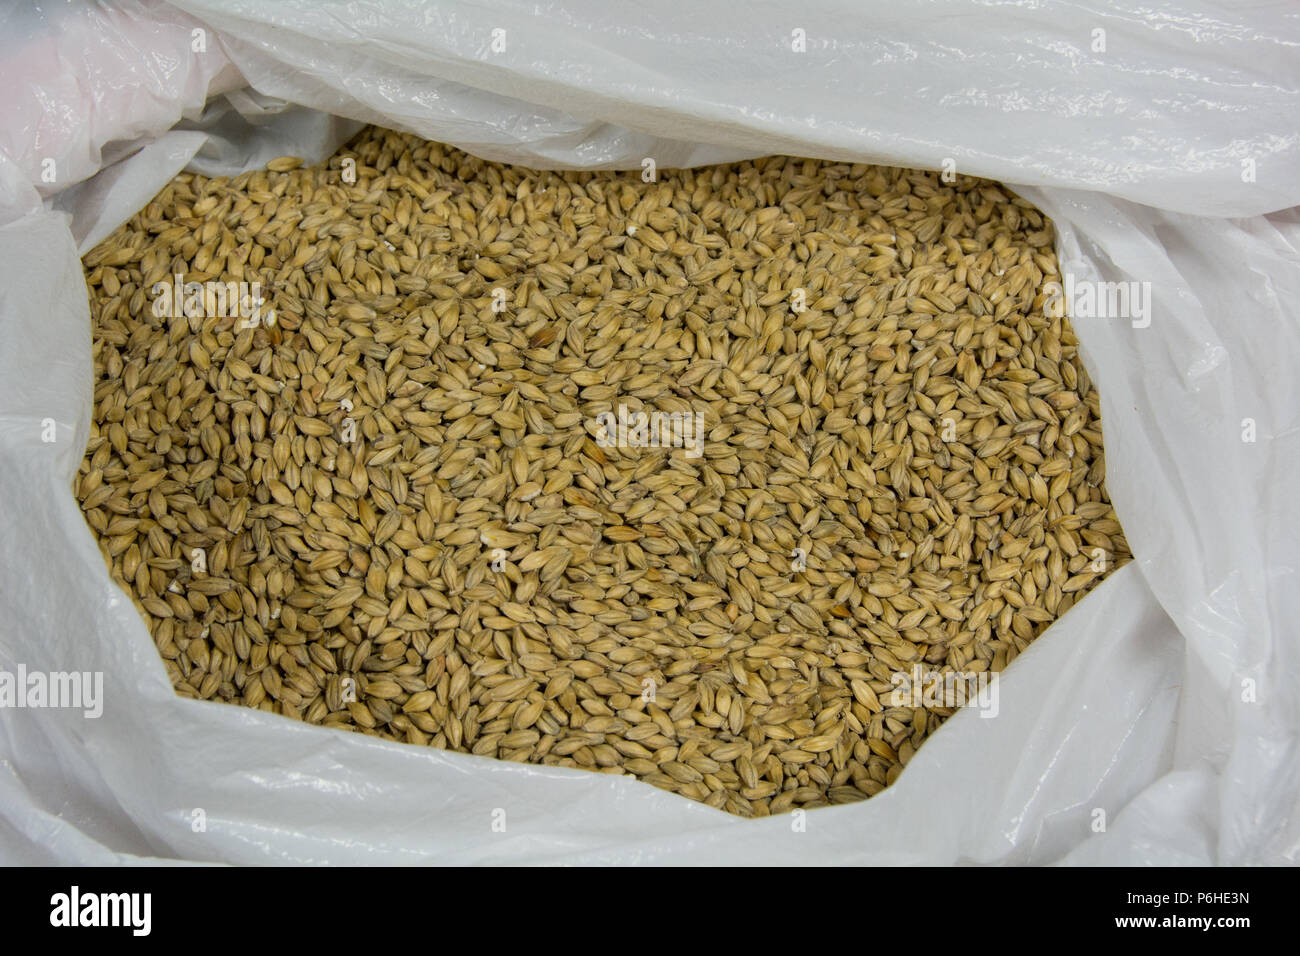 A mix of different types of malts ready for milling by home brewers. Stock Photo